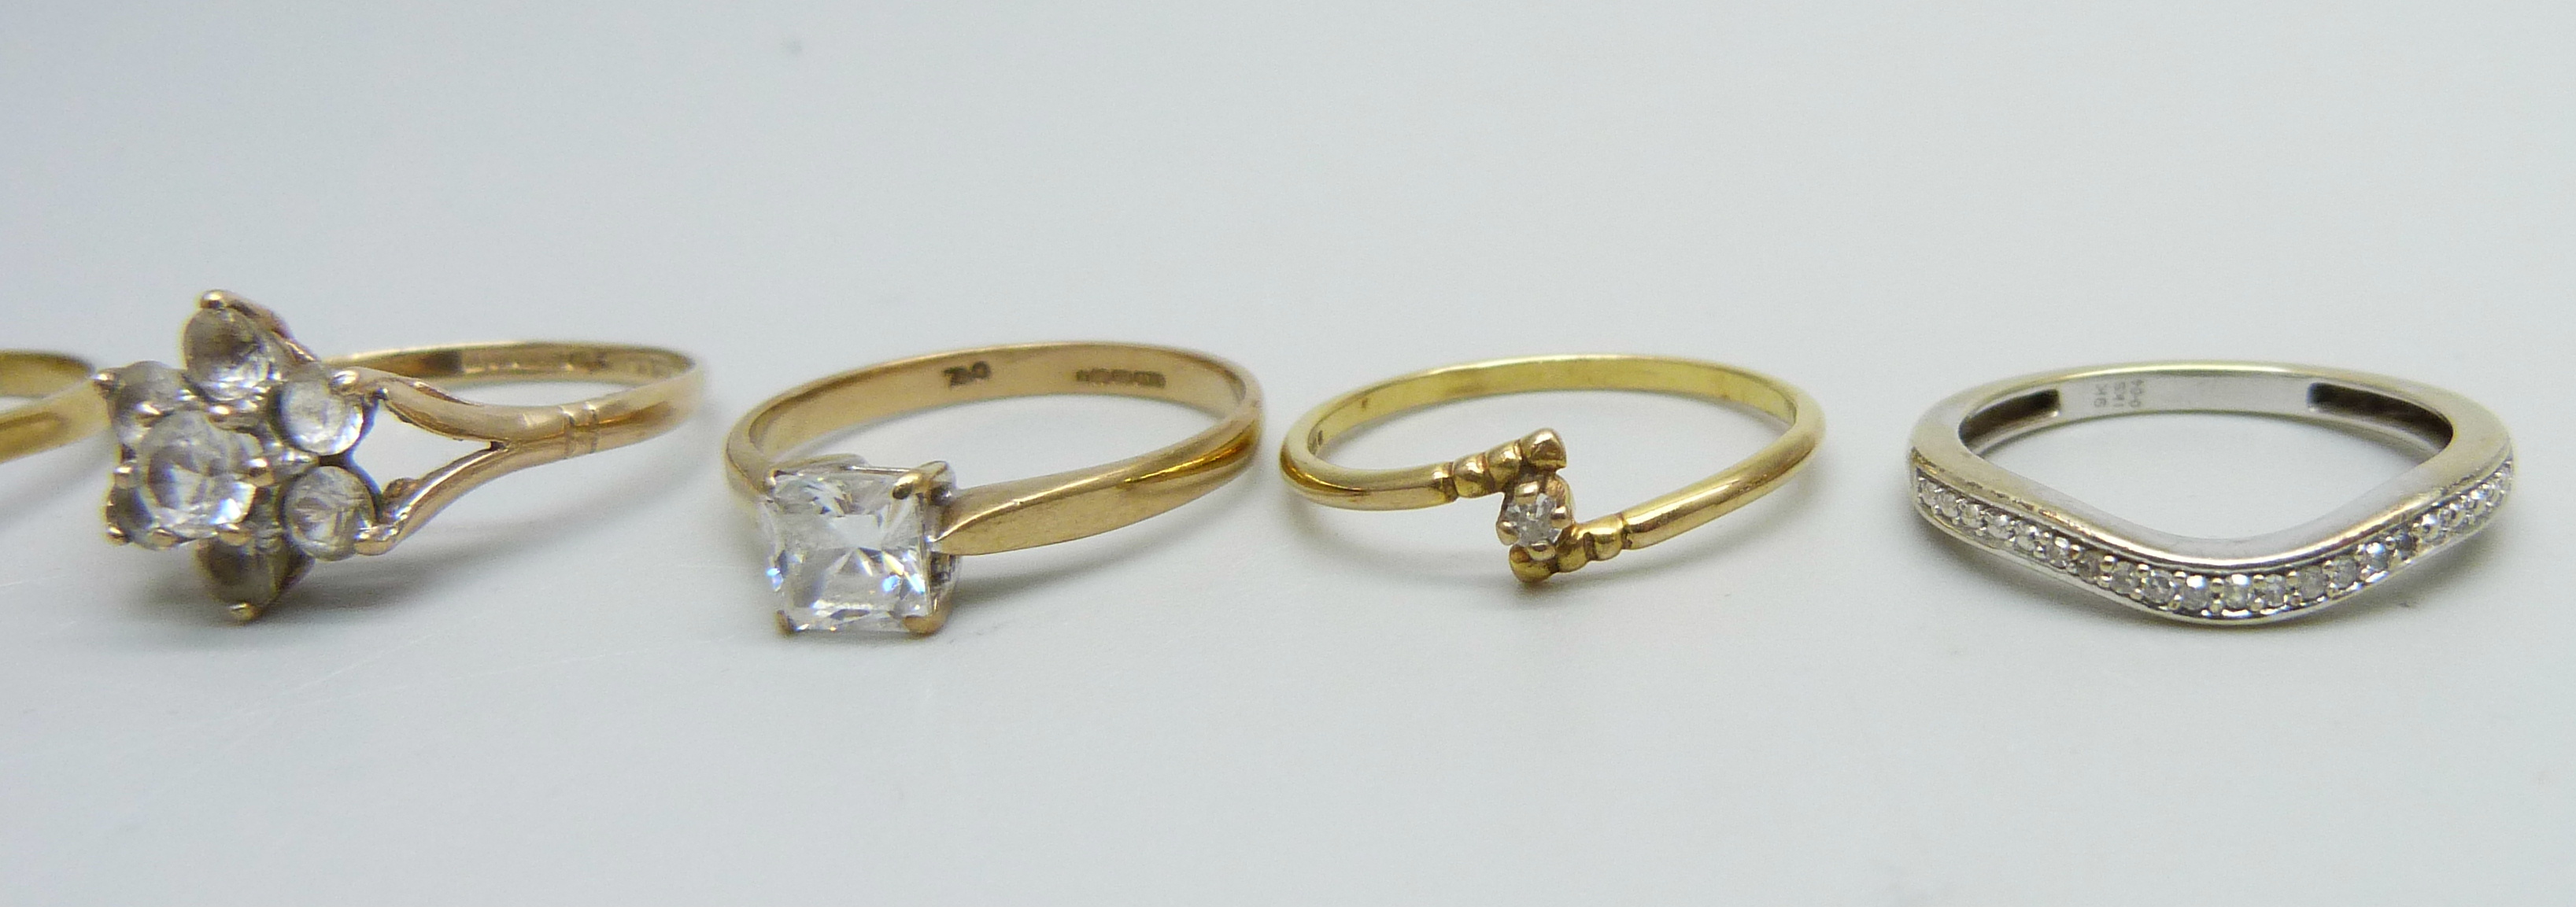 Eight 9ct gold rings, one set with 0.25 carat square diamond, 15g total weight - Image 4 of 4